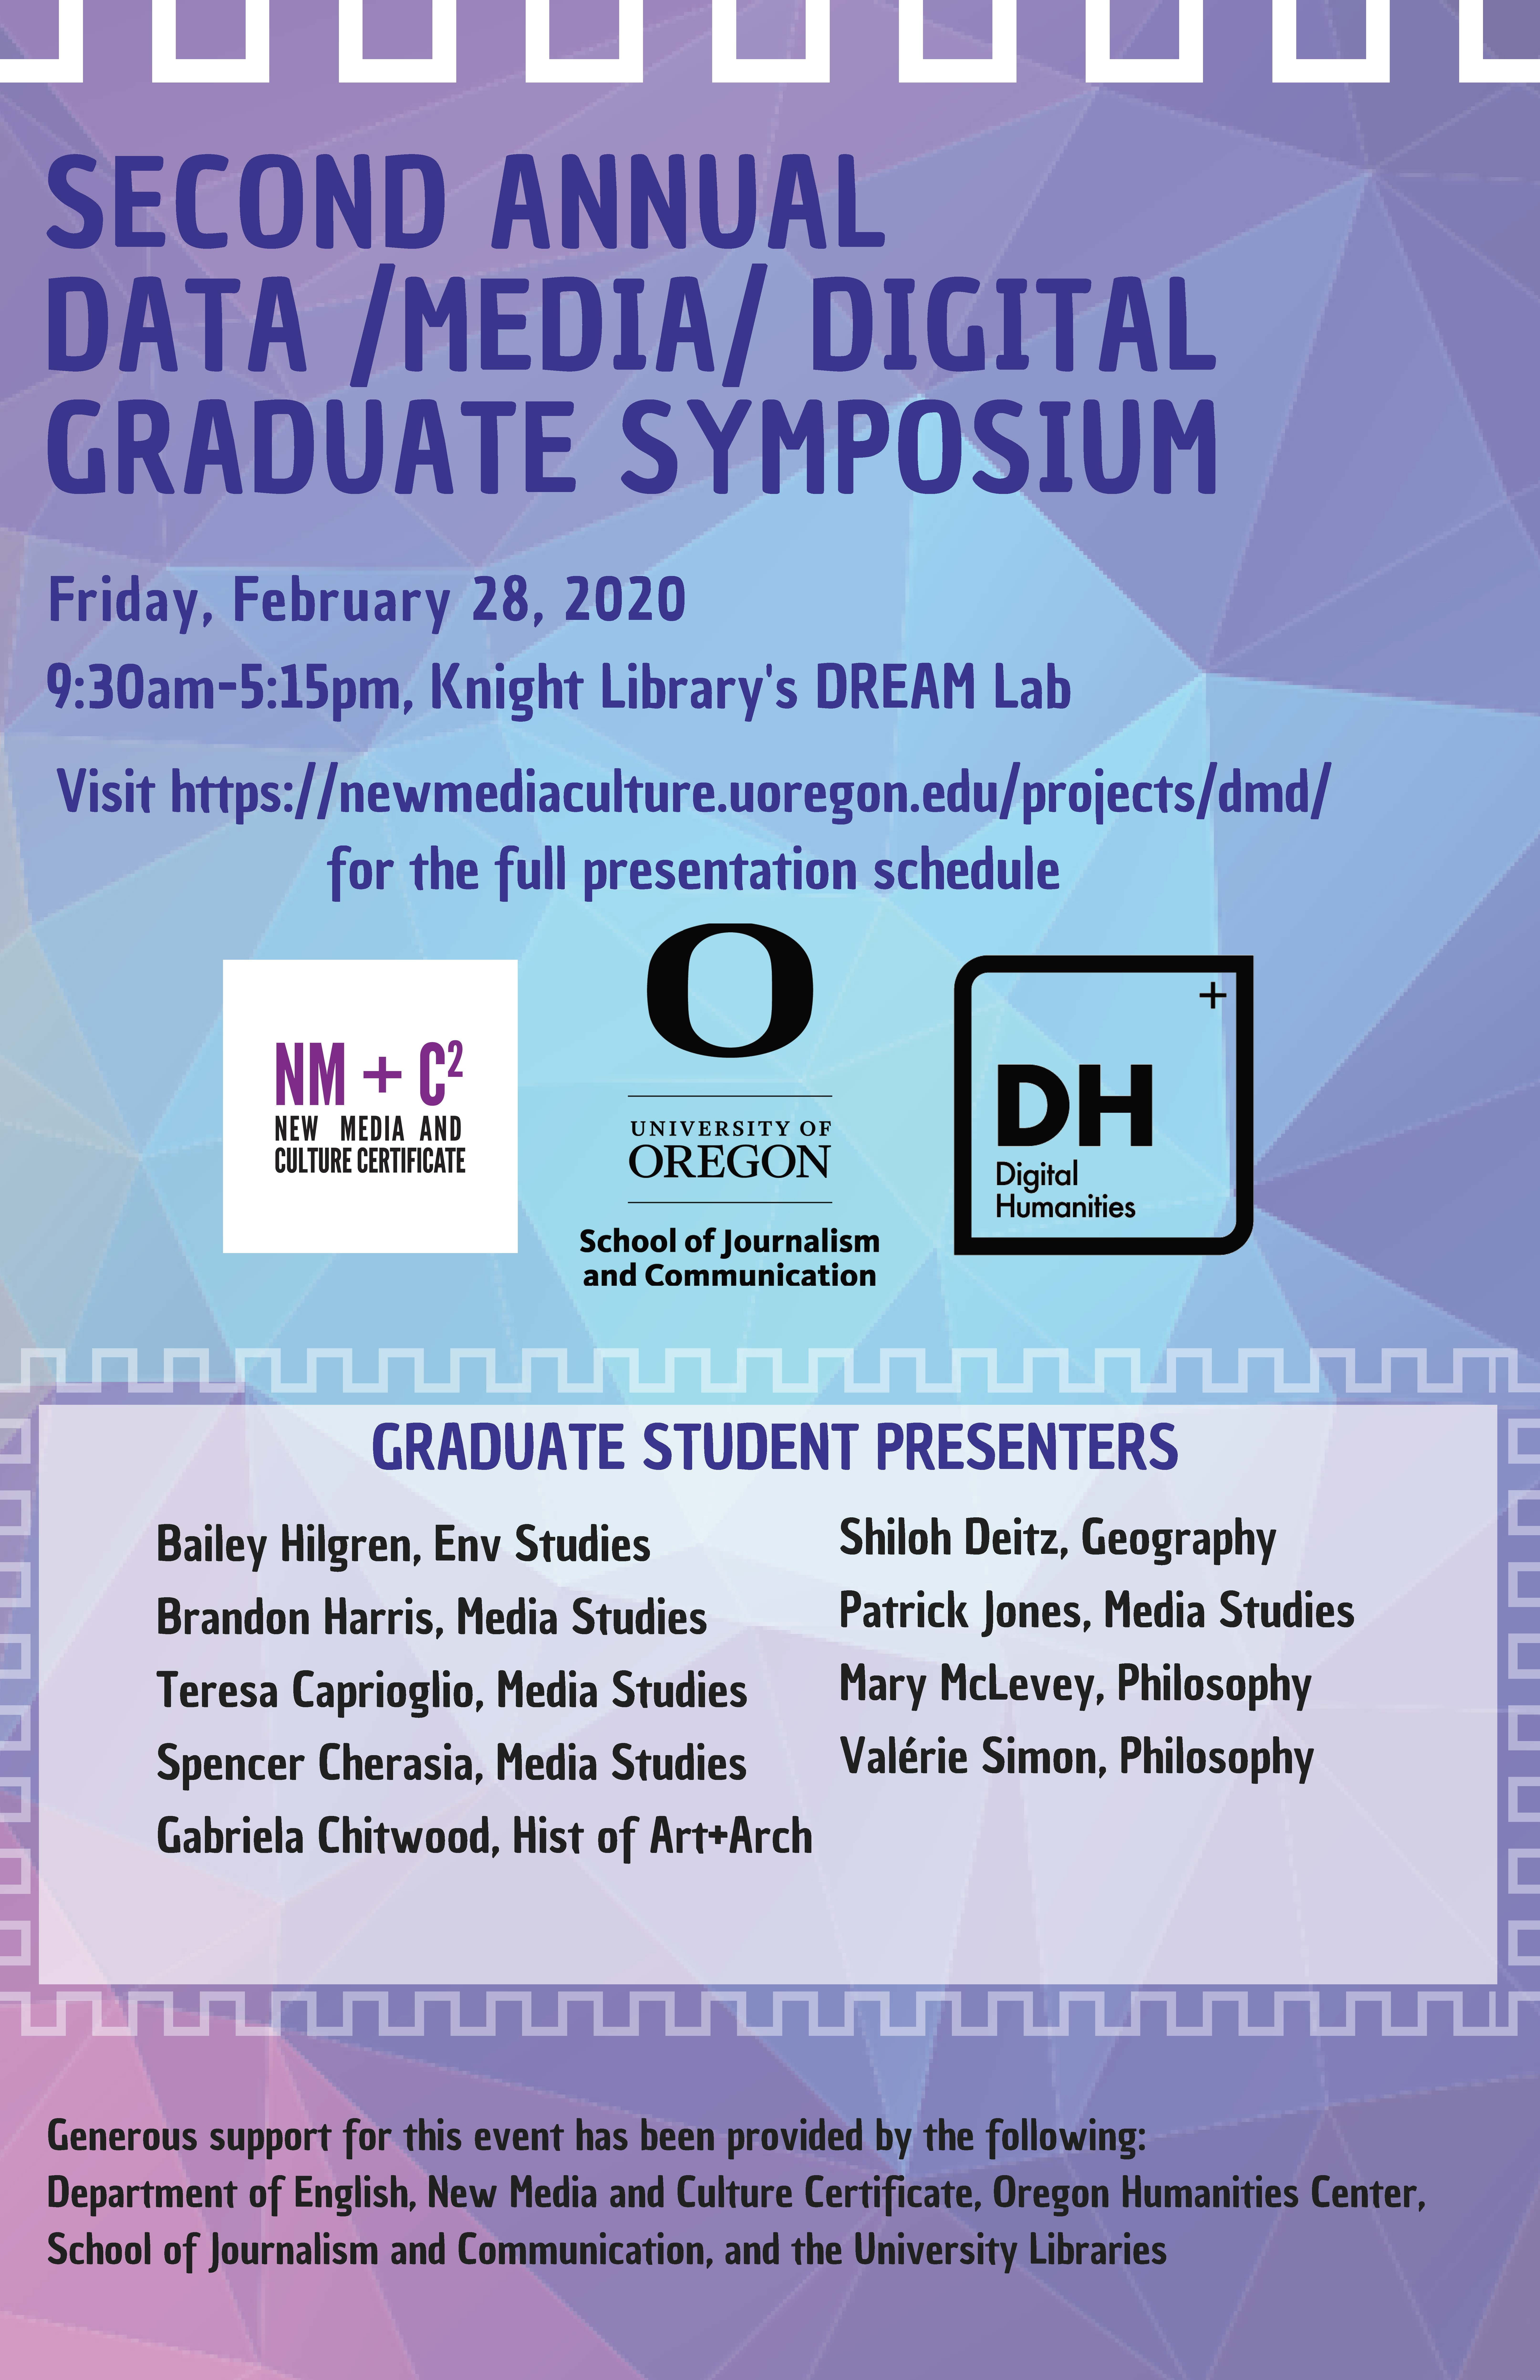 Second Annual Data / Media / Digital Graduate Symposium flyer happen on February 28th, 2020 from 9:30pm-5:15pm